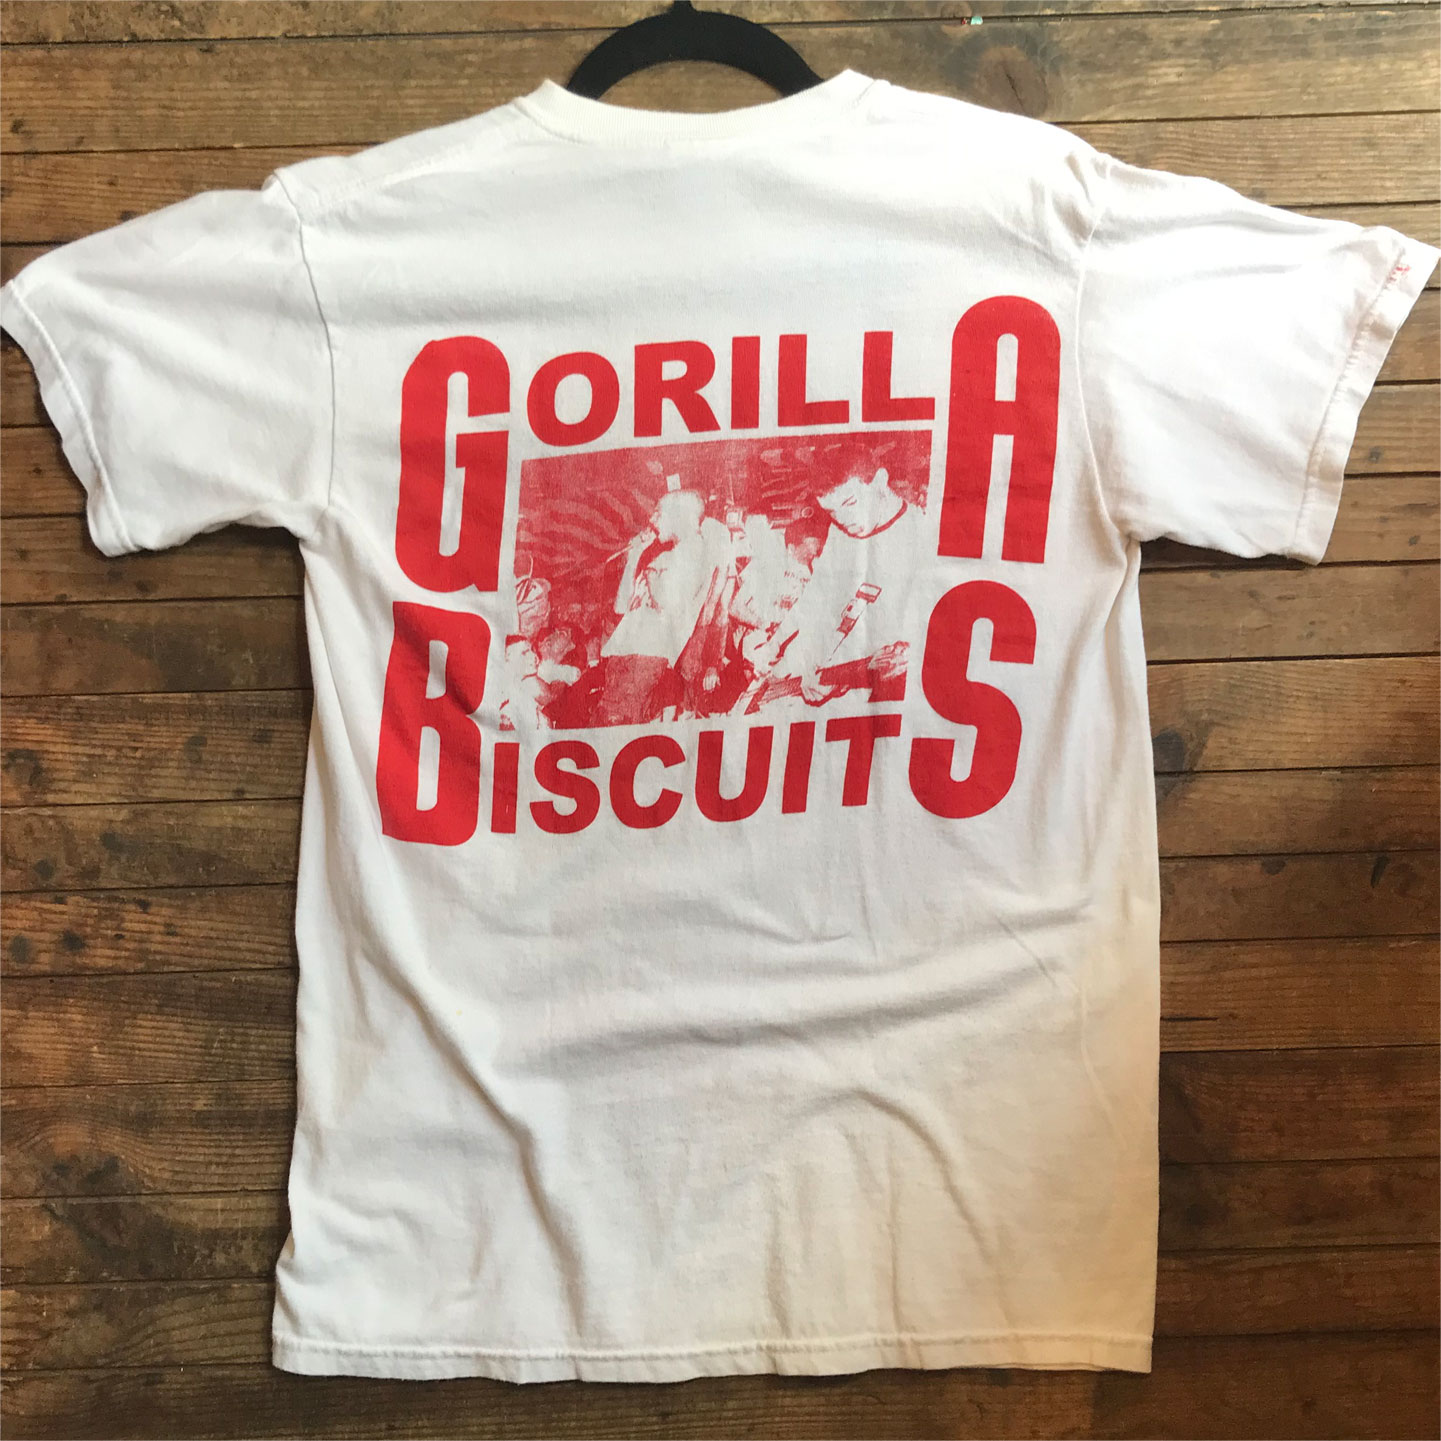 USED! GORILLA BISCUITS Tシャツ LIVE